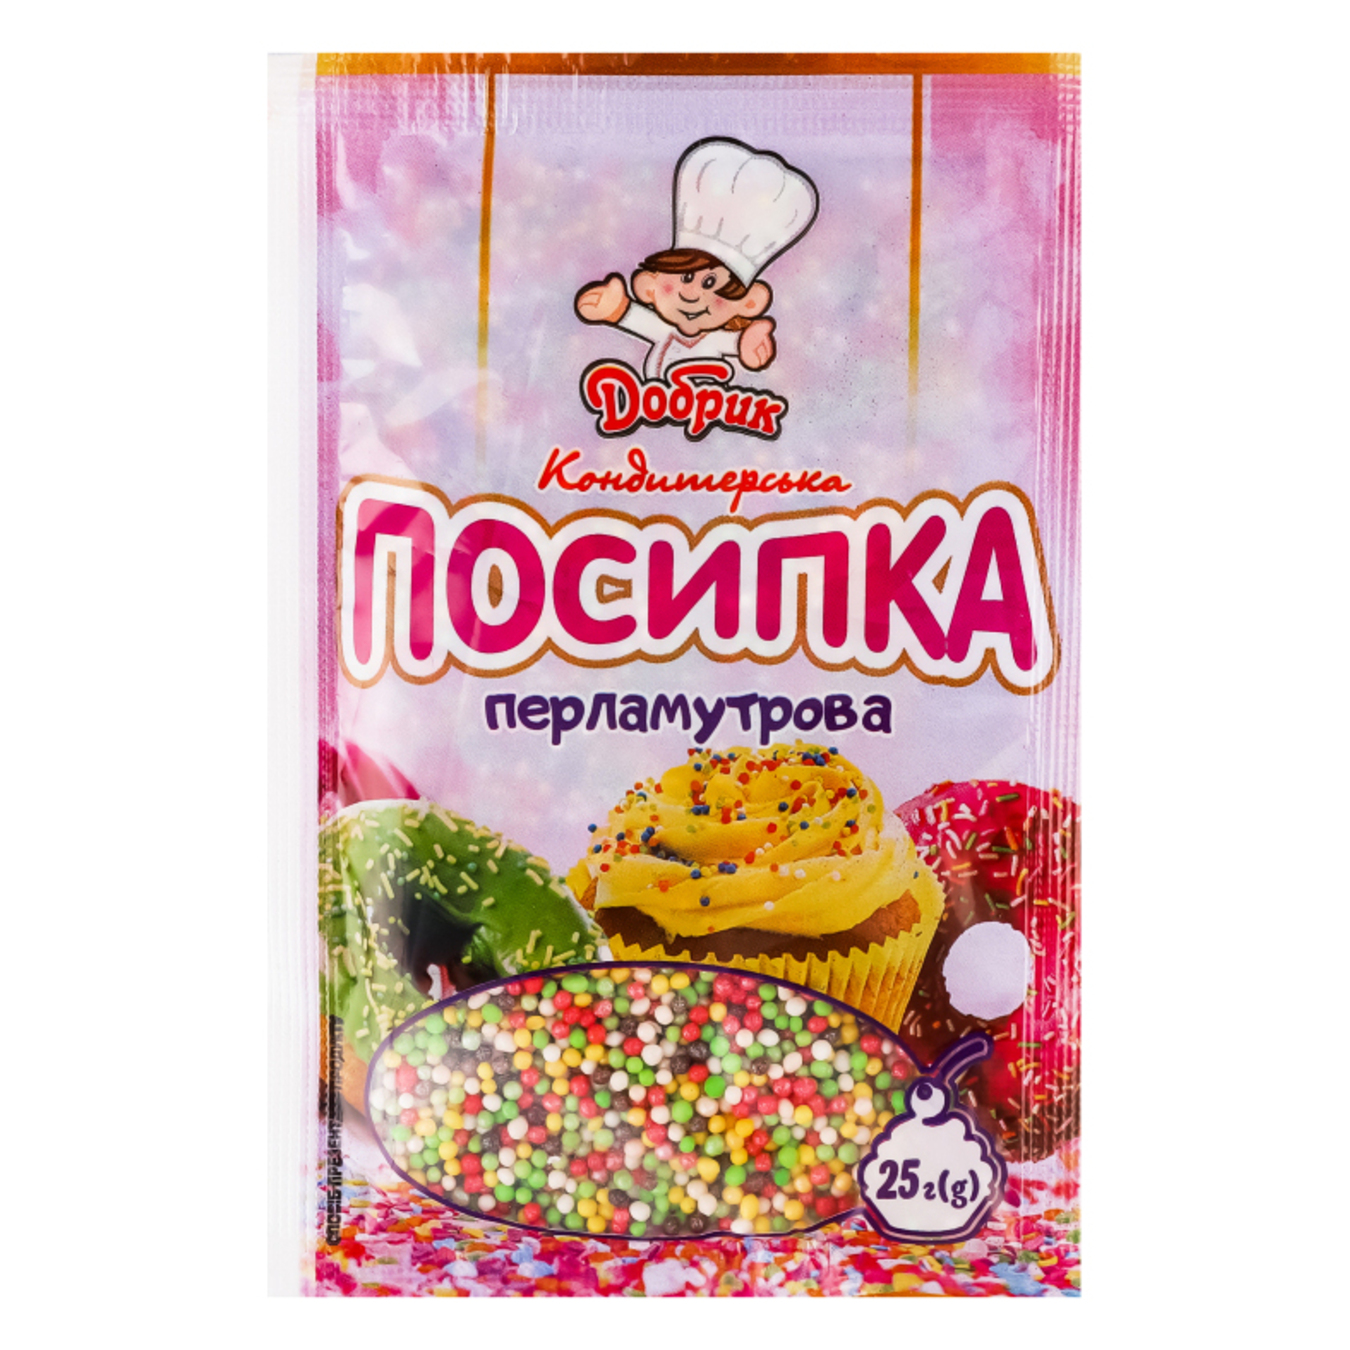 Sprinkle confectionery Dobrik Assorted mother-of-pearl 25g